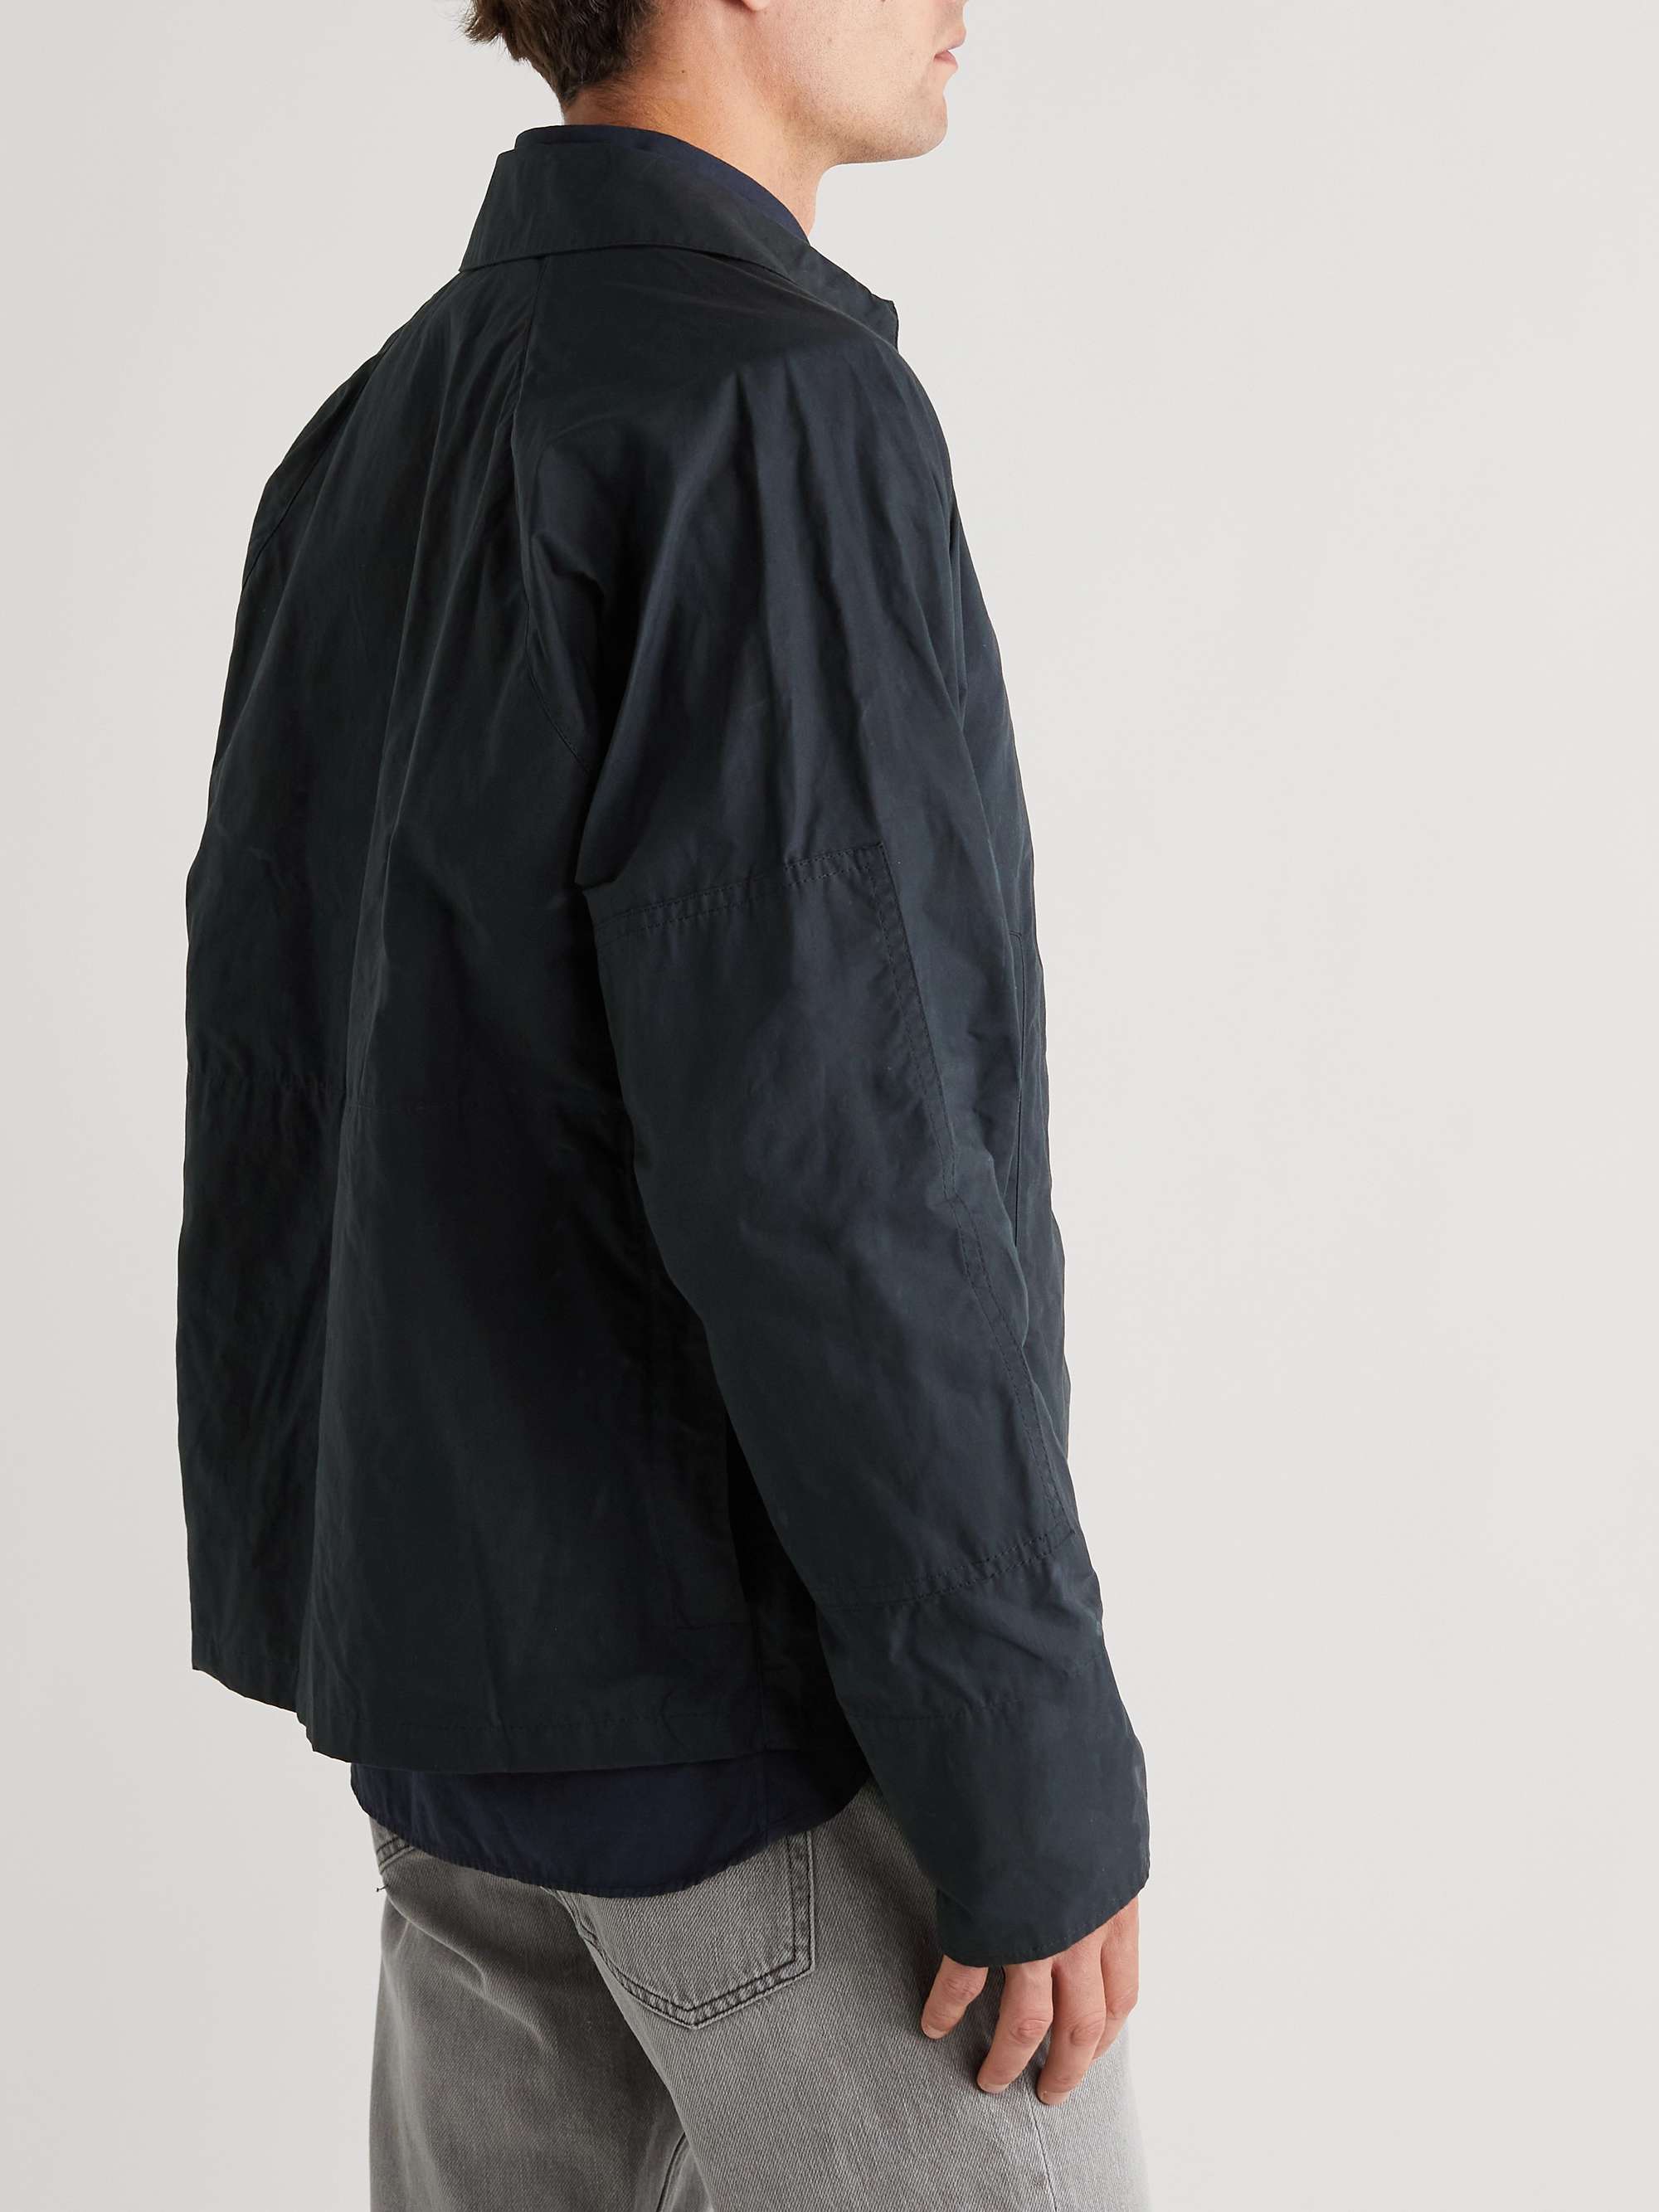 BARBOUR WHITE LABEL + Engineered Garments Waxed-Cotton Jacket